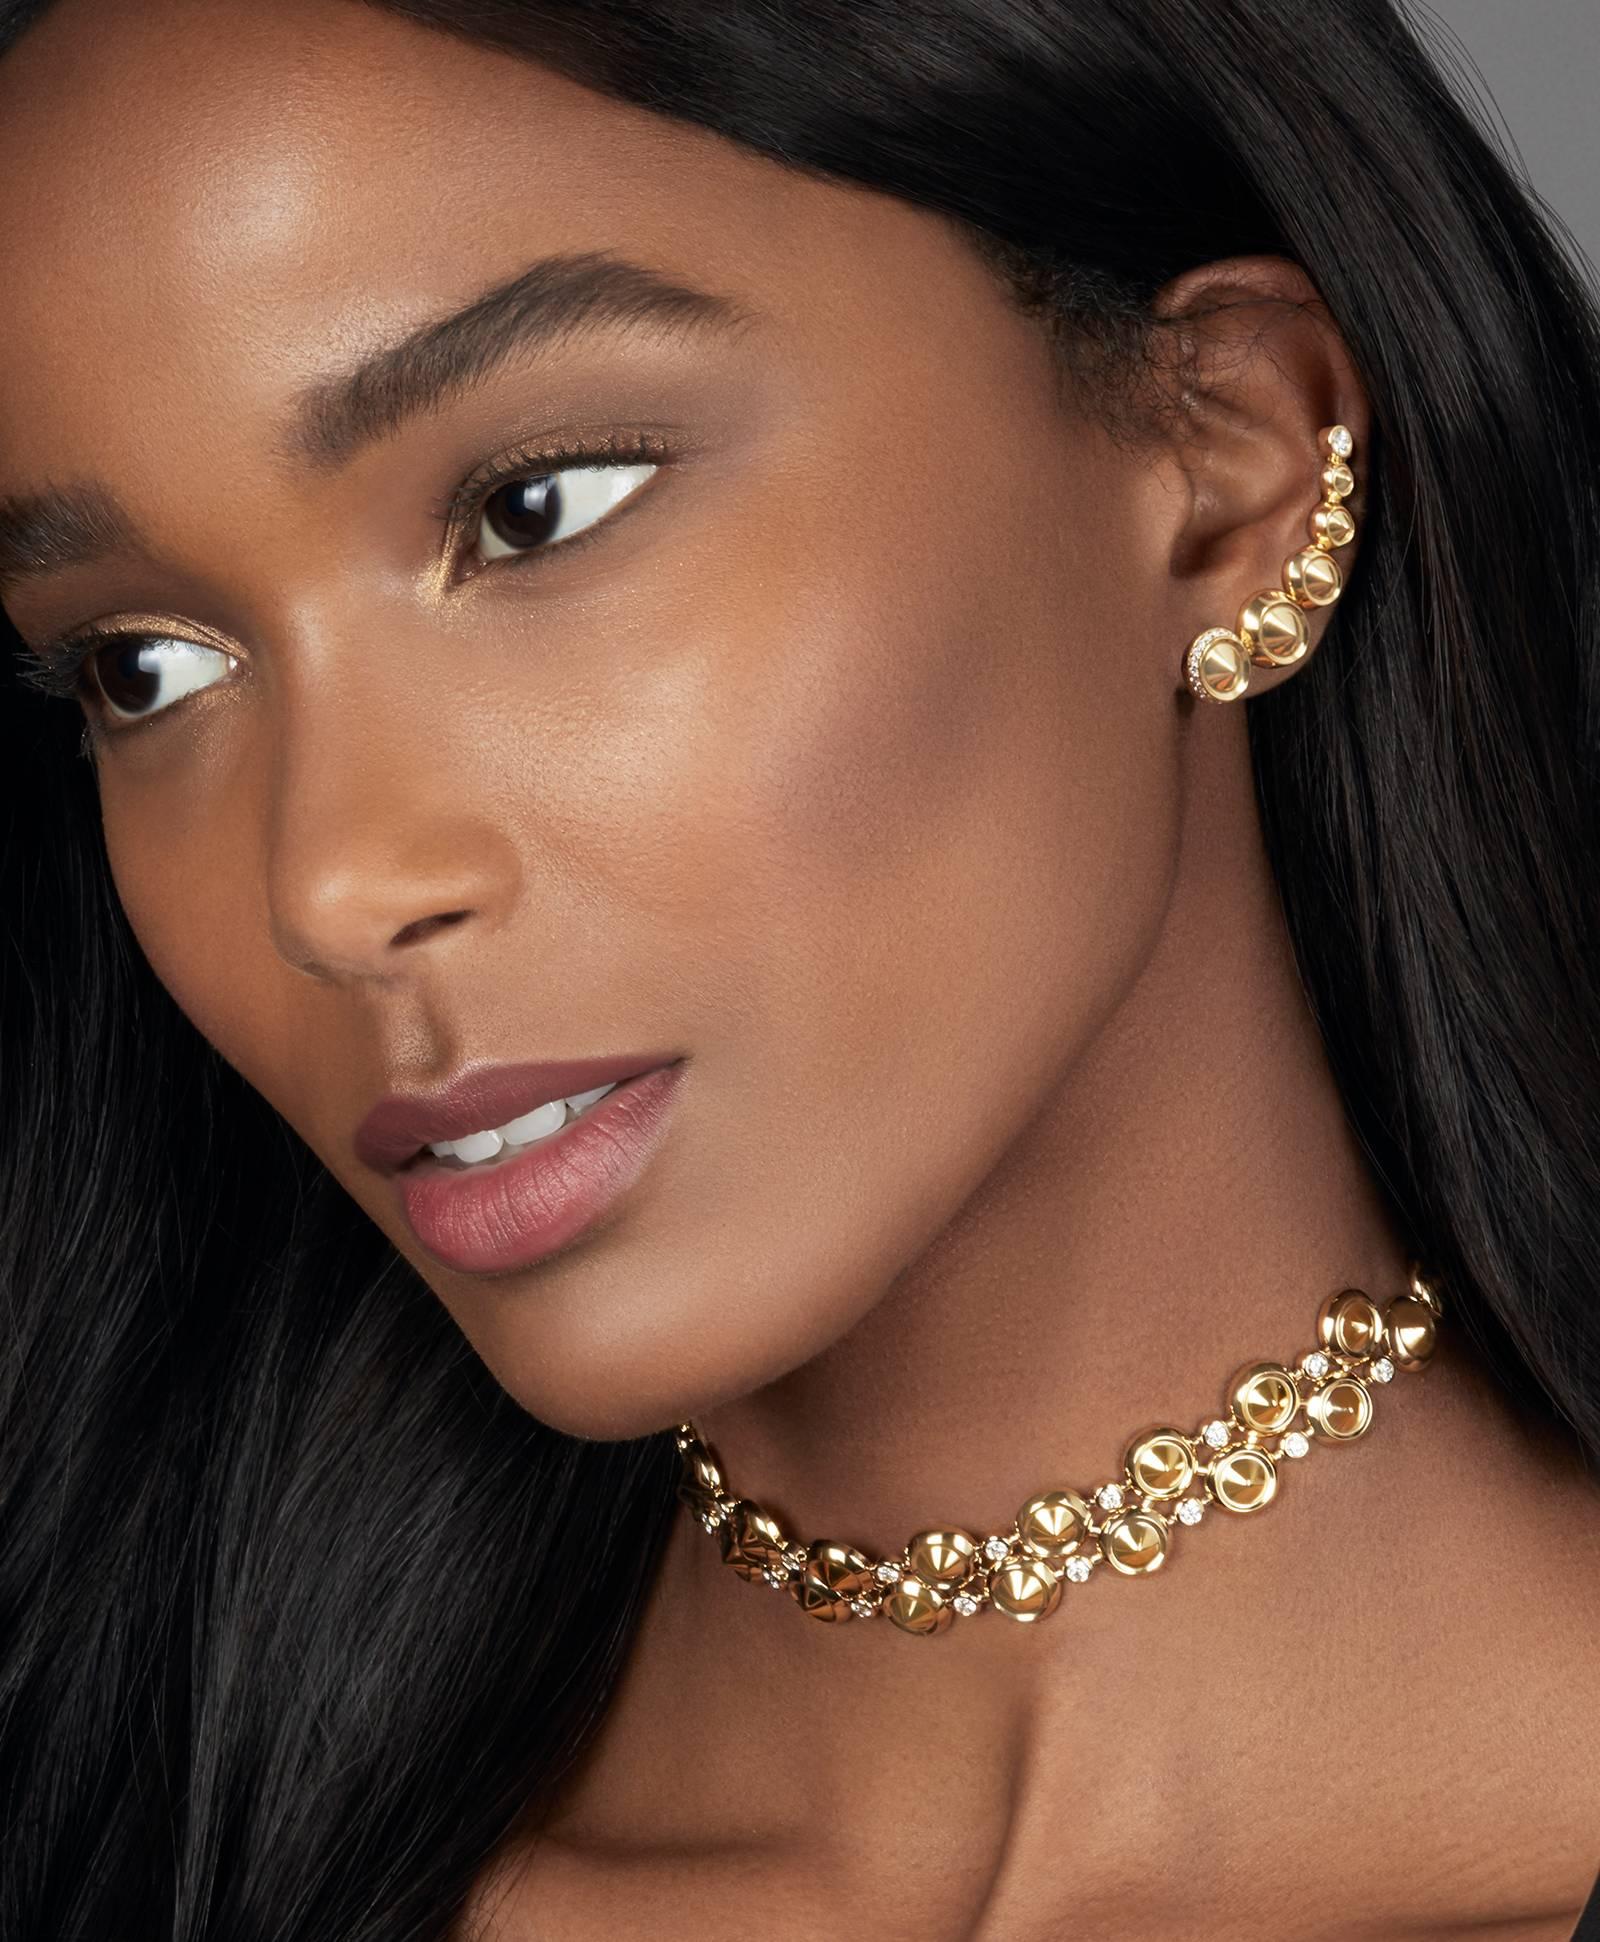 Strikingly feminine and elegant, the Sahara collection from VANLELES is crafted entirely from fair trade gold and ethically sourced diamonds. Inspired by rooftop nights under the Sahara sky, this collection draws its unique design from traditional